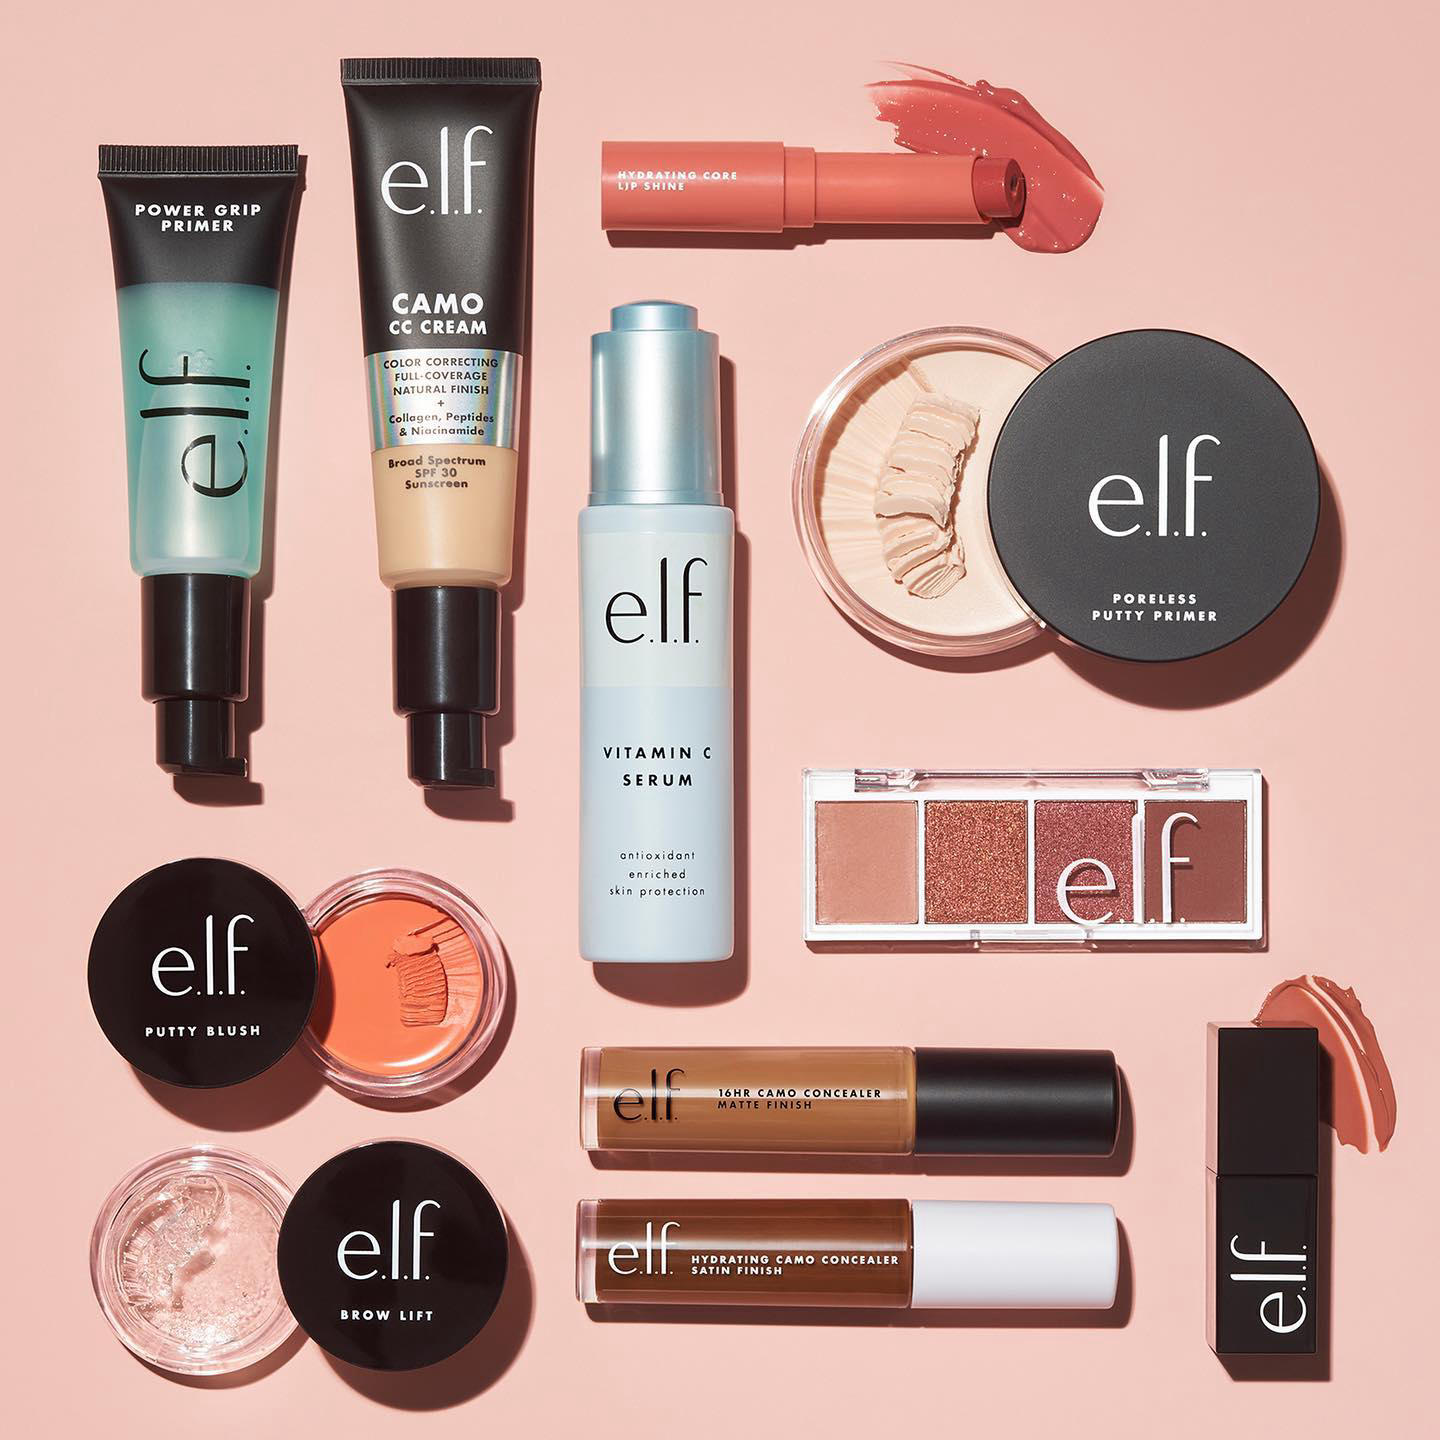 image  1 e.l.f. Cosmetics and Skincare - BRB, we've gone viral